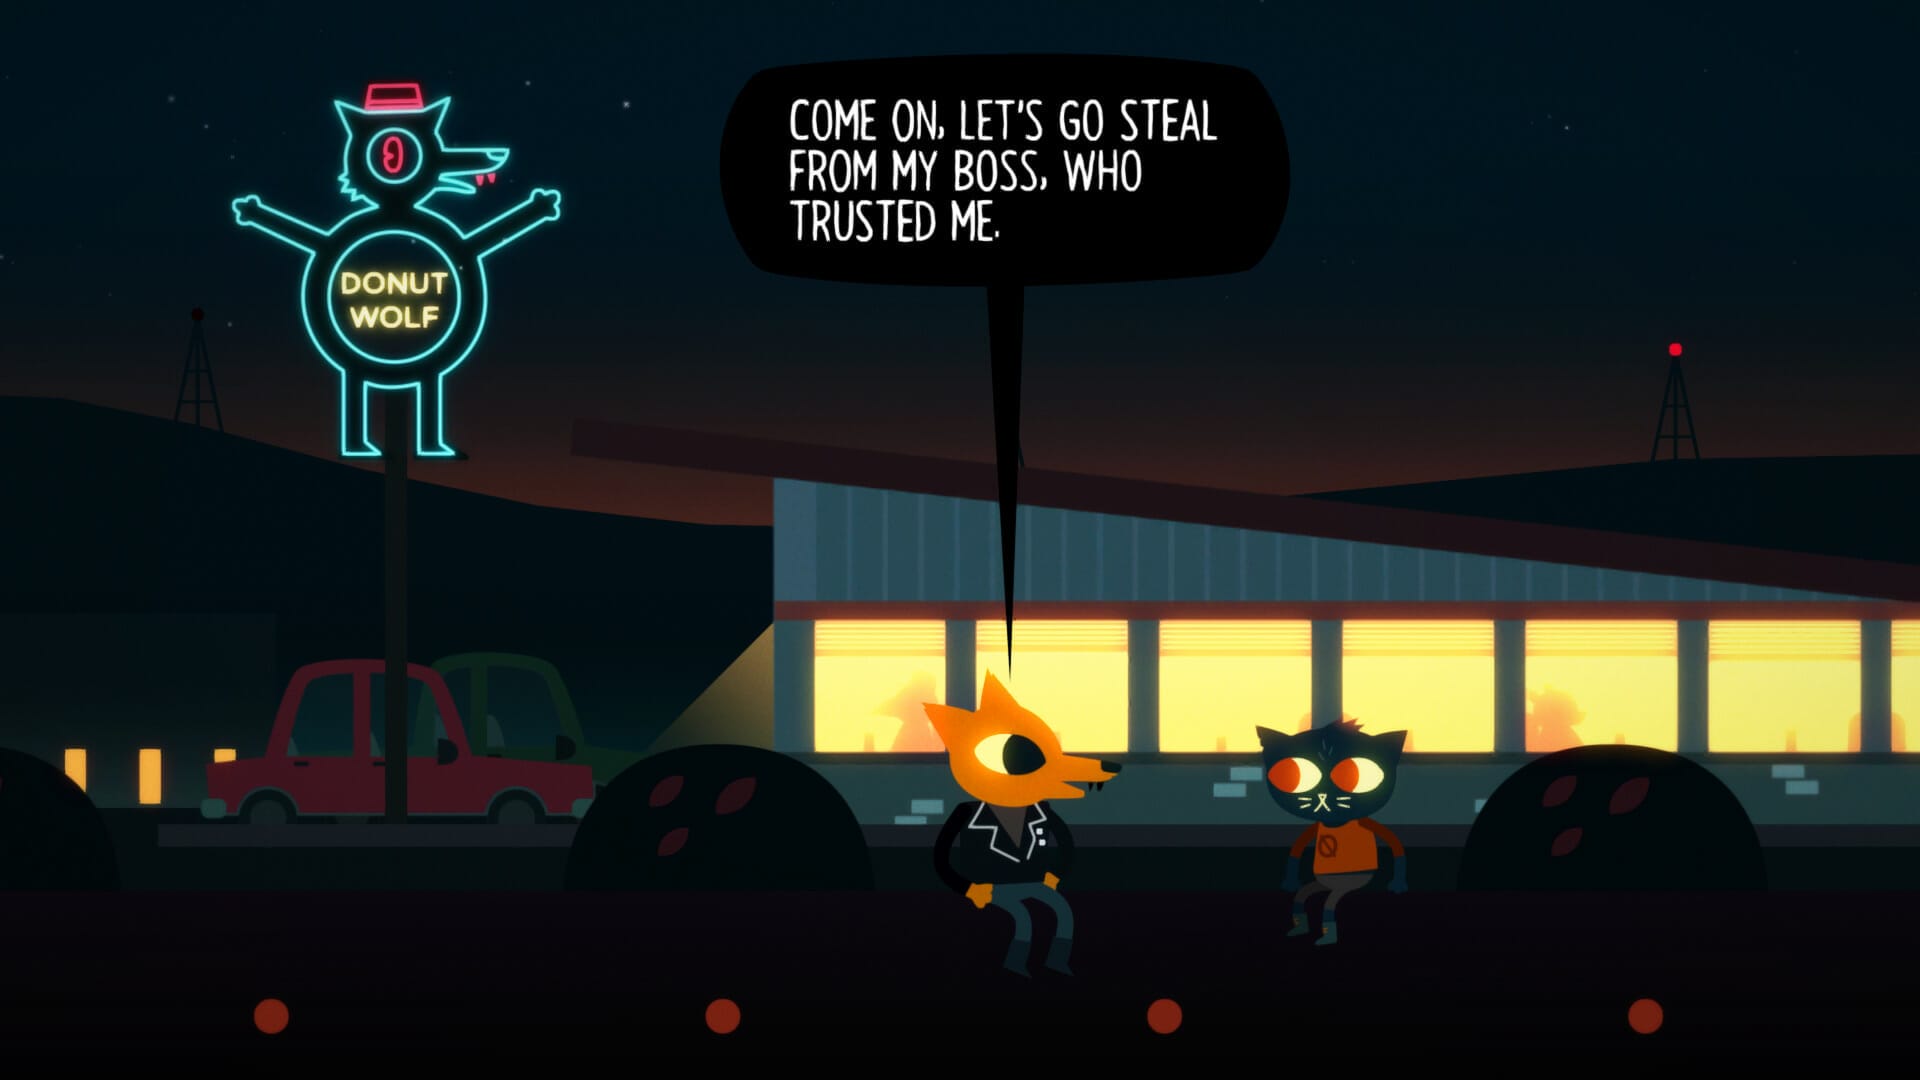 A screenshot from Night In The Woods, featuring Gregg and Mae that talk about committing crimes in front of Gregg's store.